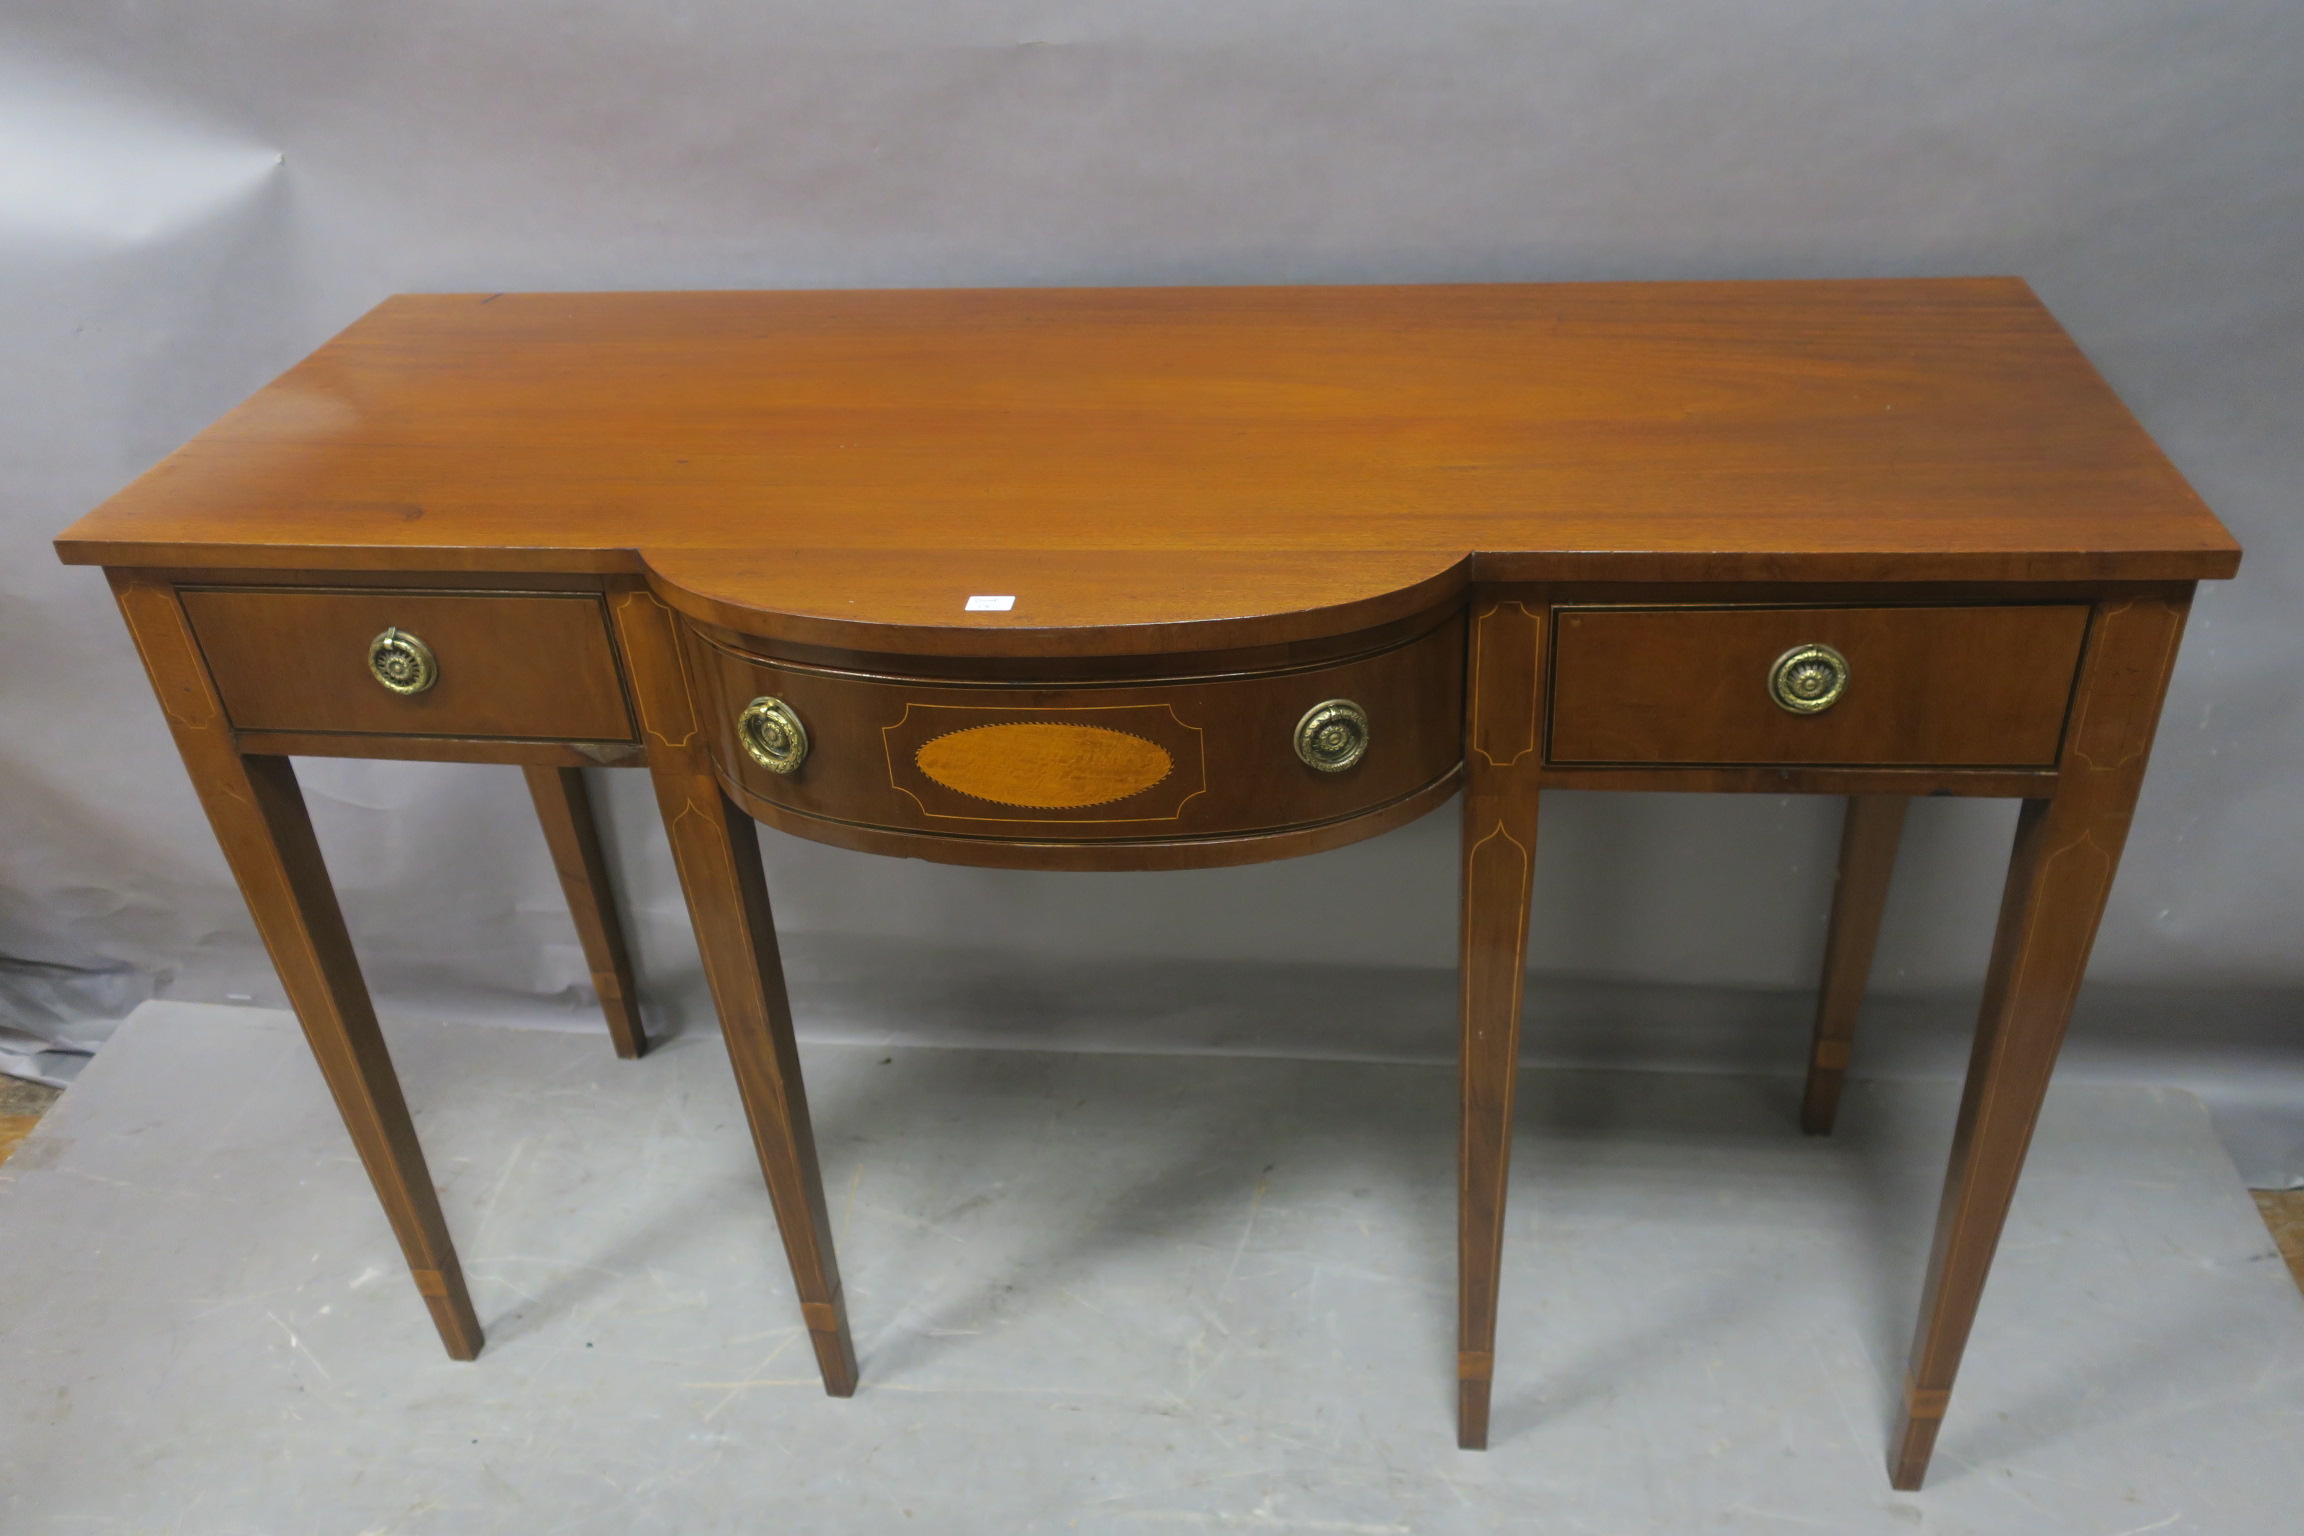 A SHERATON DESIGN MAHOGANY AND SATINWOOD INLAID SIDE TABLE,